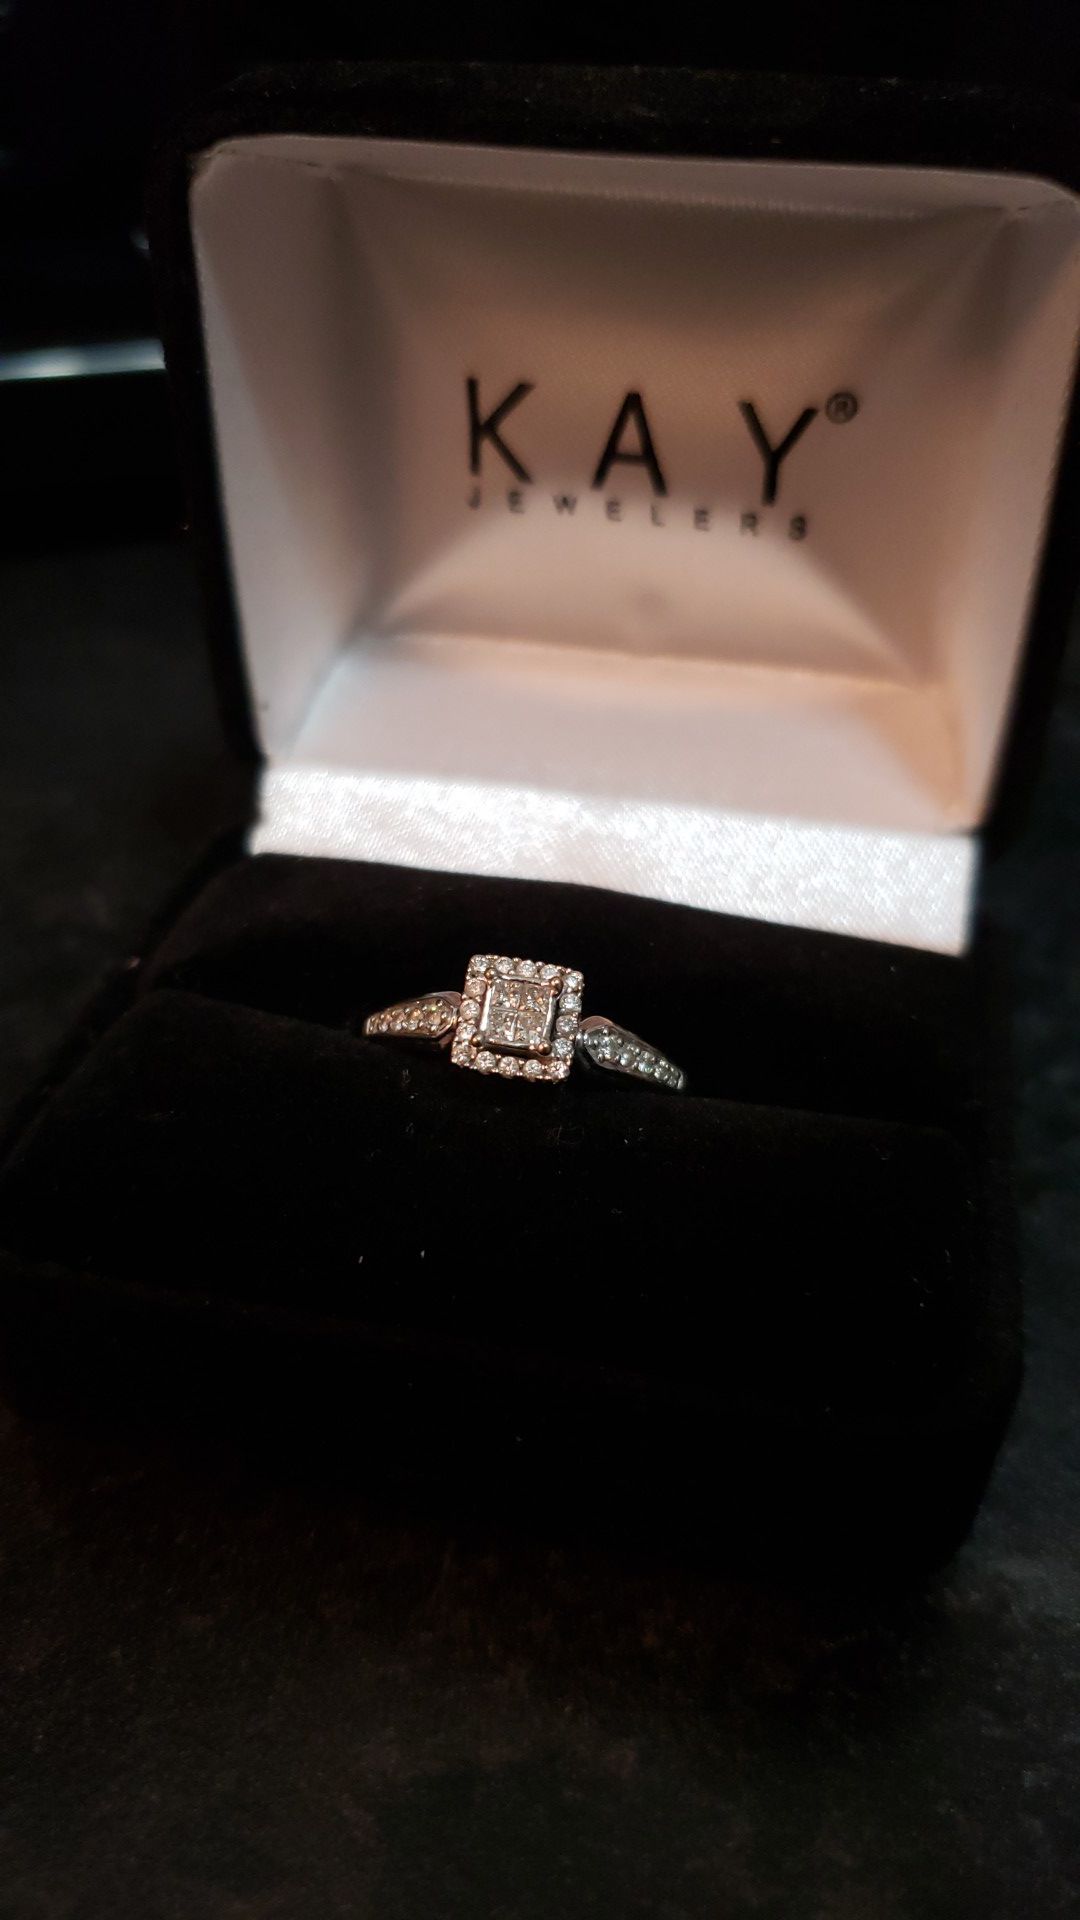 KAY jewelers engagement ring